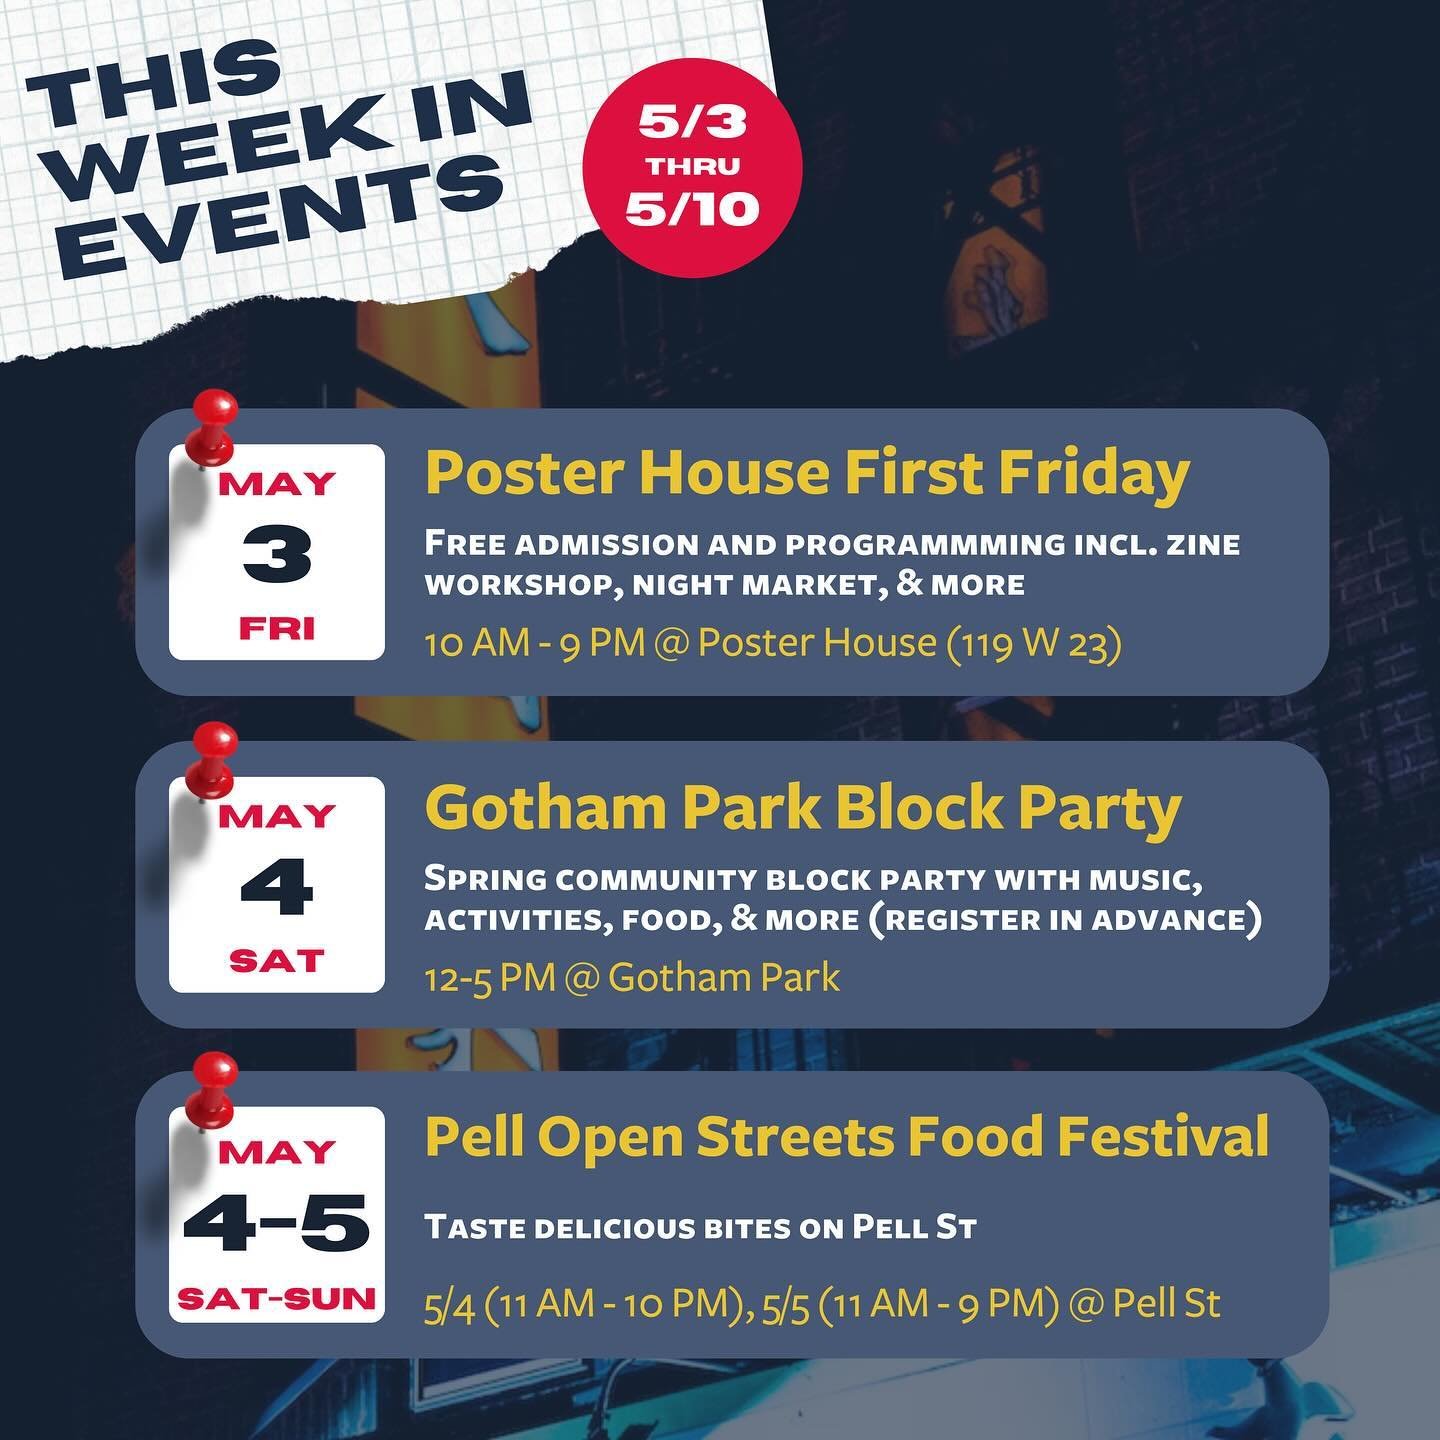 Yesterday marked the beginning of May, which means it&rsquo;s the official start of #APAHM!

APAHM kicks off a series of exciting programming in and around Chinatown. Swipe above to see some fun events hosted by our friends and partners:

🏮&nbsp;Fri